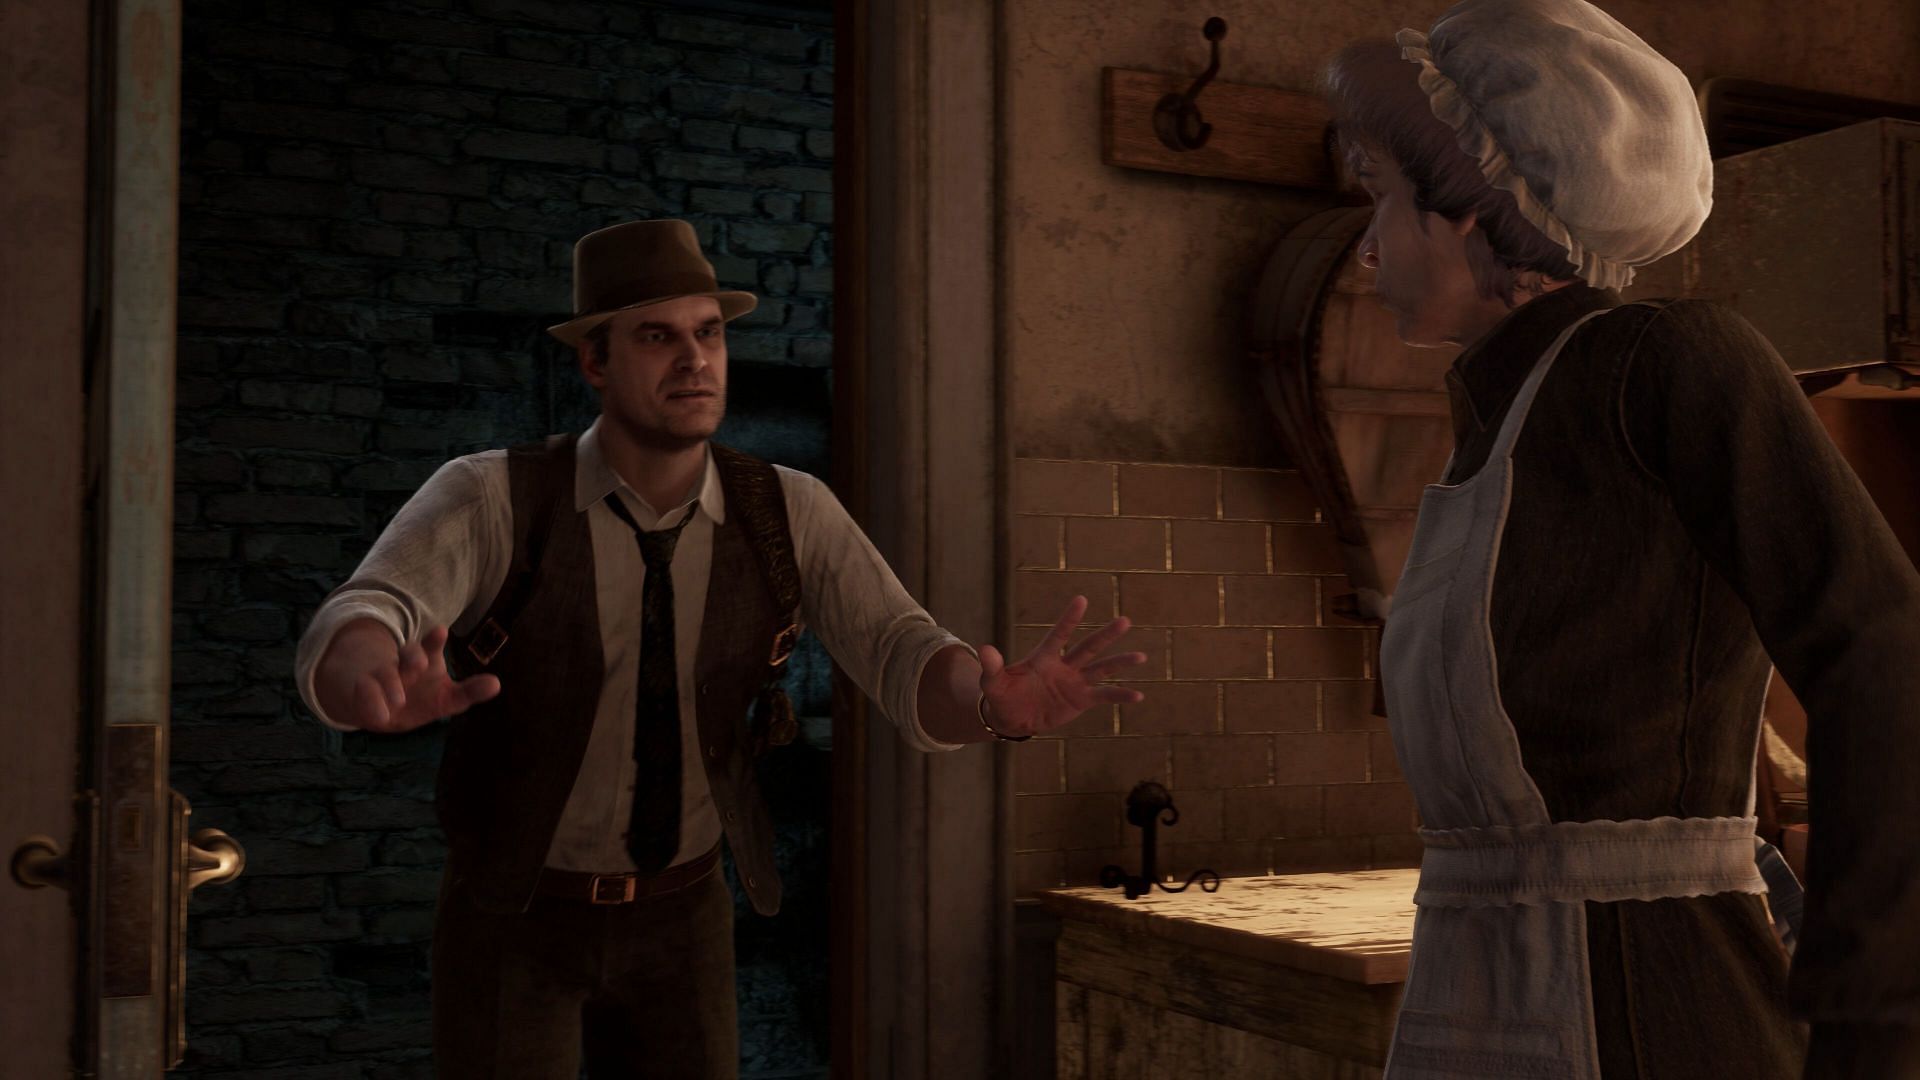 Players will solve the mysteries of Derceto Mansion as Emily and Edward (Image via THQ Nordic)